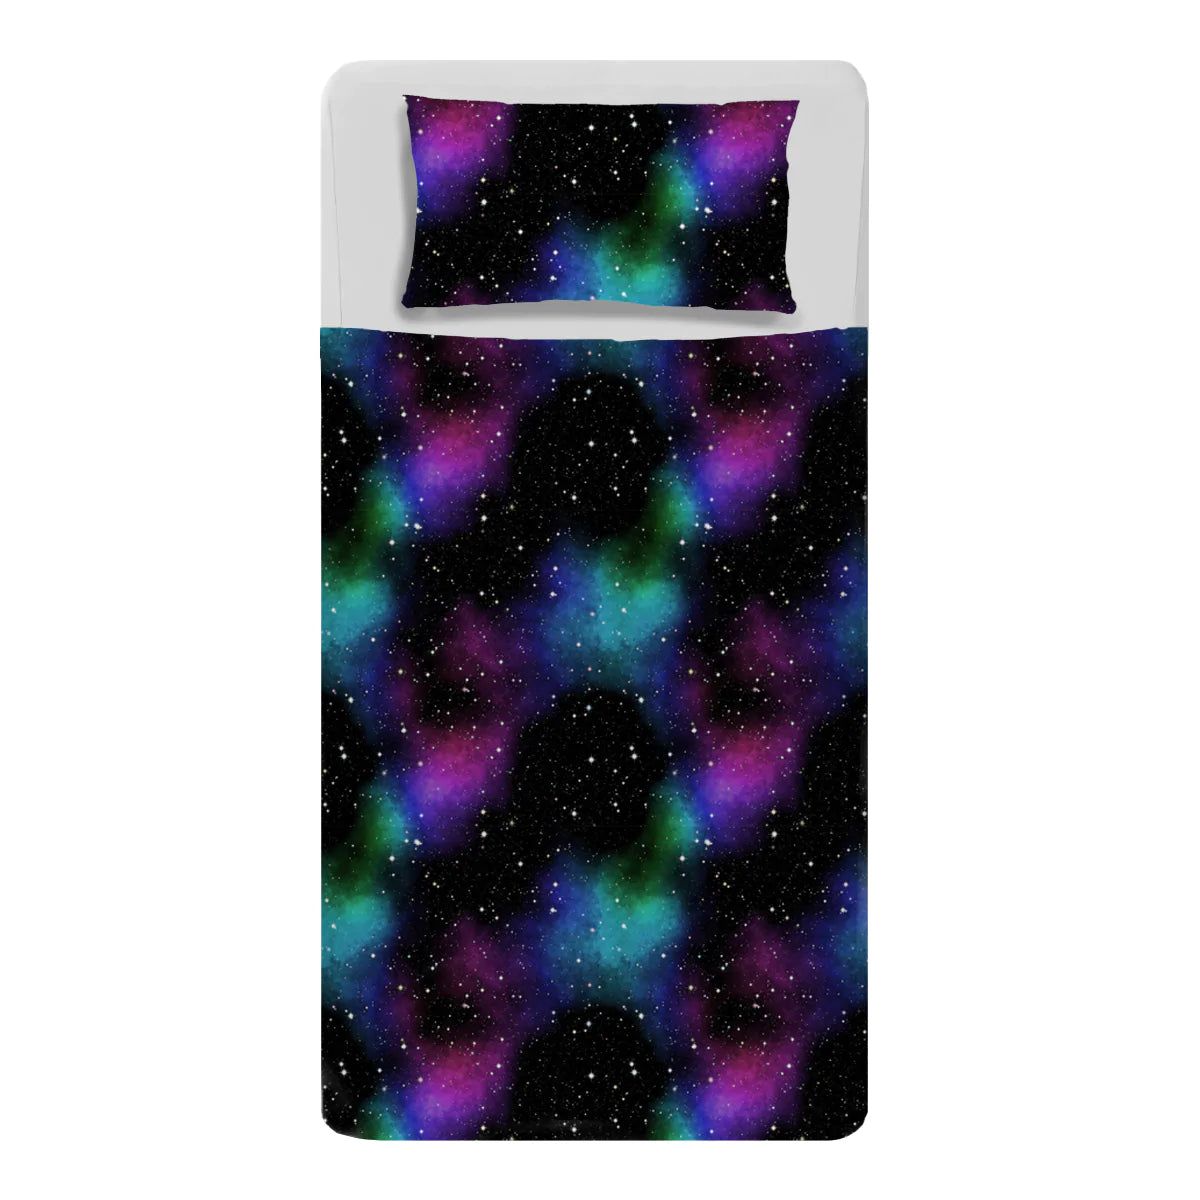 Calmcare_Night_Sky_Sensory_Compression_Bed_Sheet_and_pillow_case